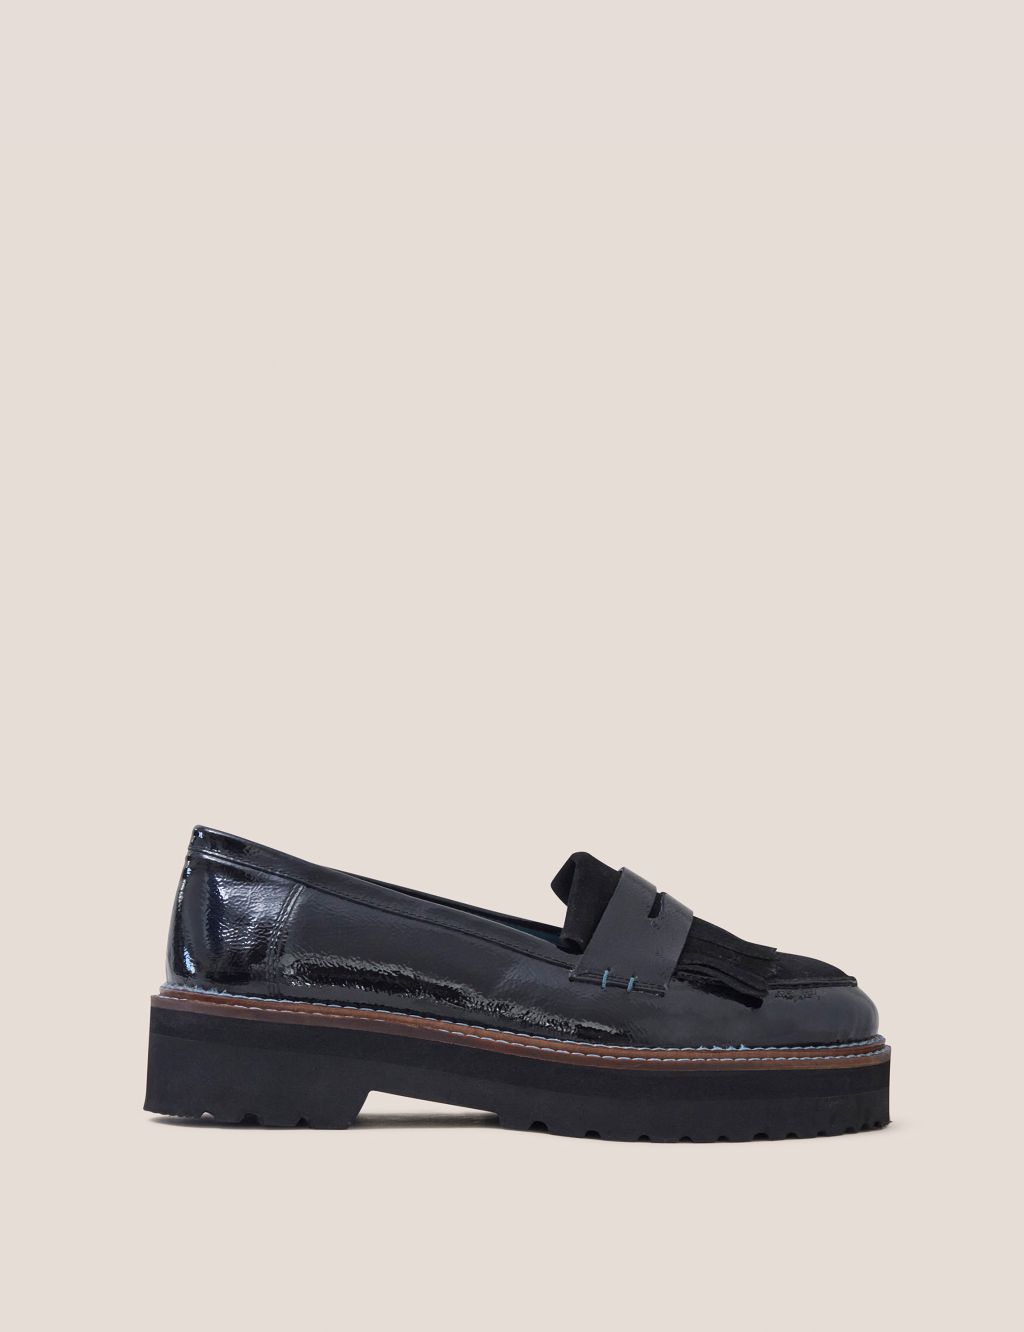 Leather Patent Slip On Block Heel Loafers image 1